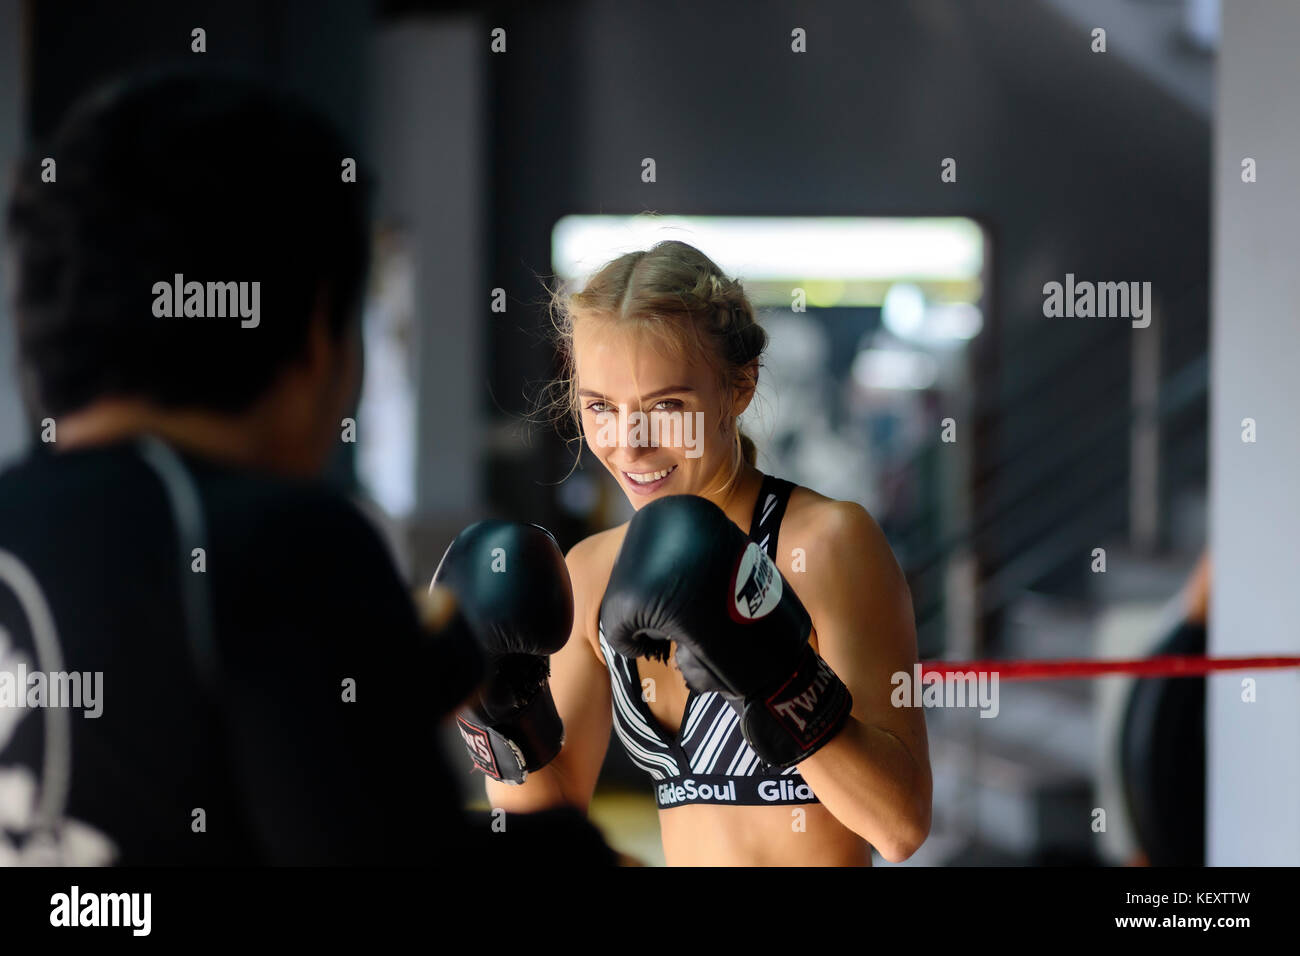 Photograph of young female kickboxer in fighting stance in ring with coach, Seminyak, Bali, Indonesia Stock Photo